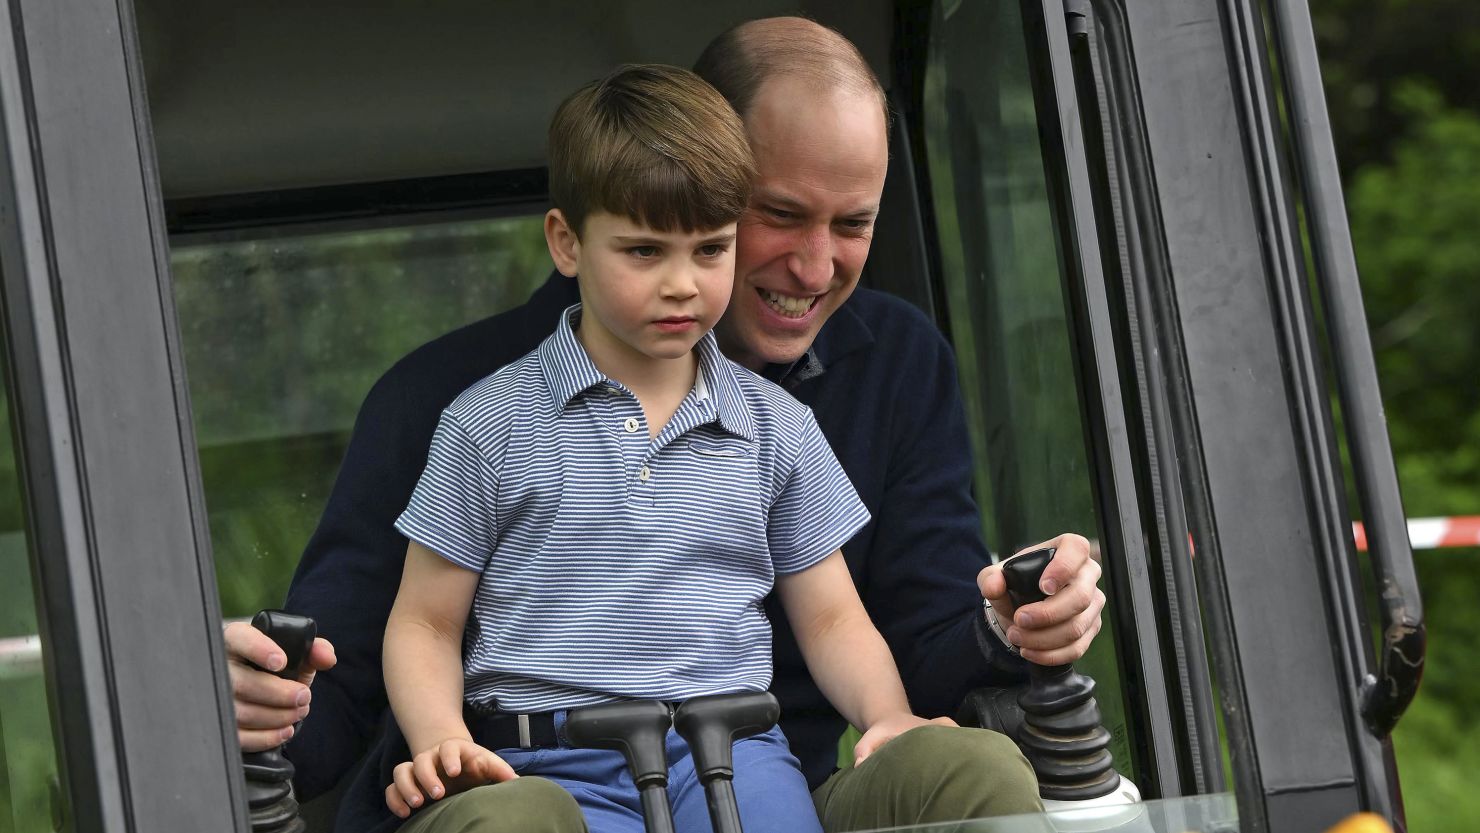 Prince Louis helped his father, the Prince of Wales, use an excavator while taking part in the Big Help Out, during a visit to the 3rd Upton Scouts Hut.